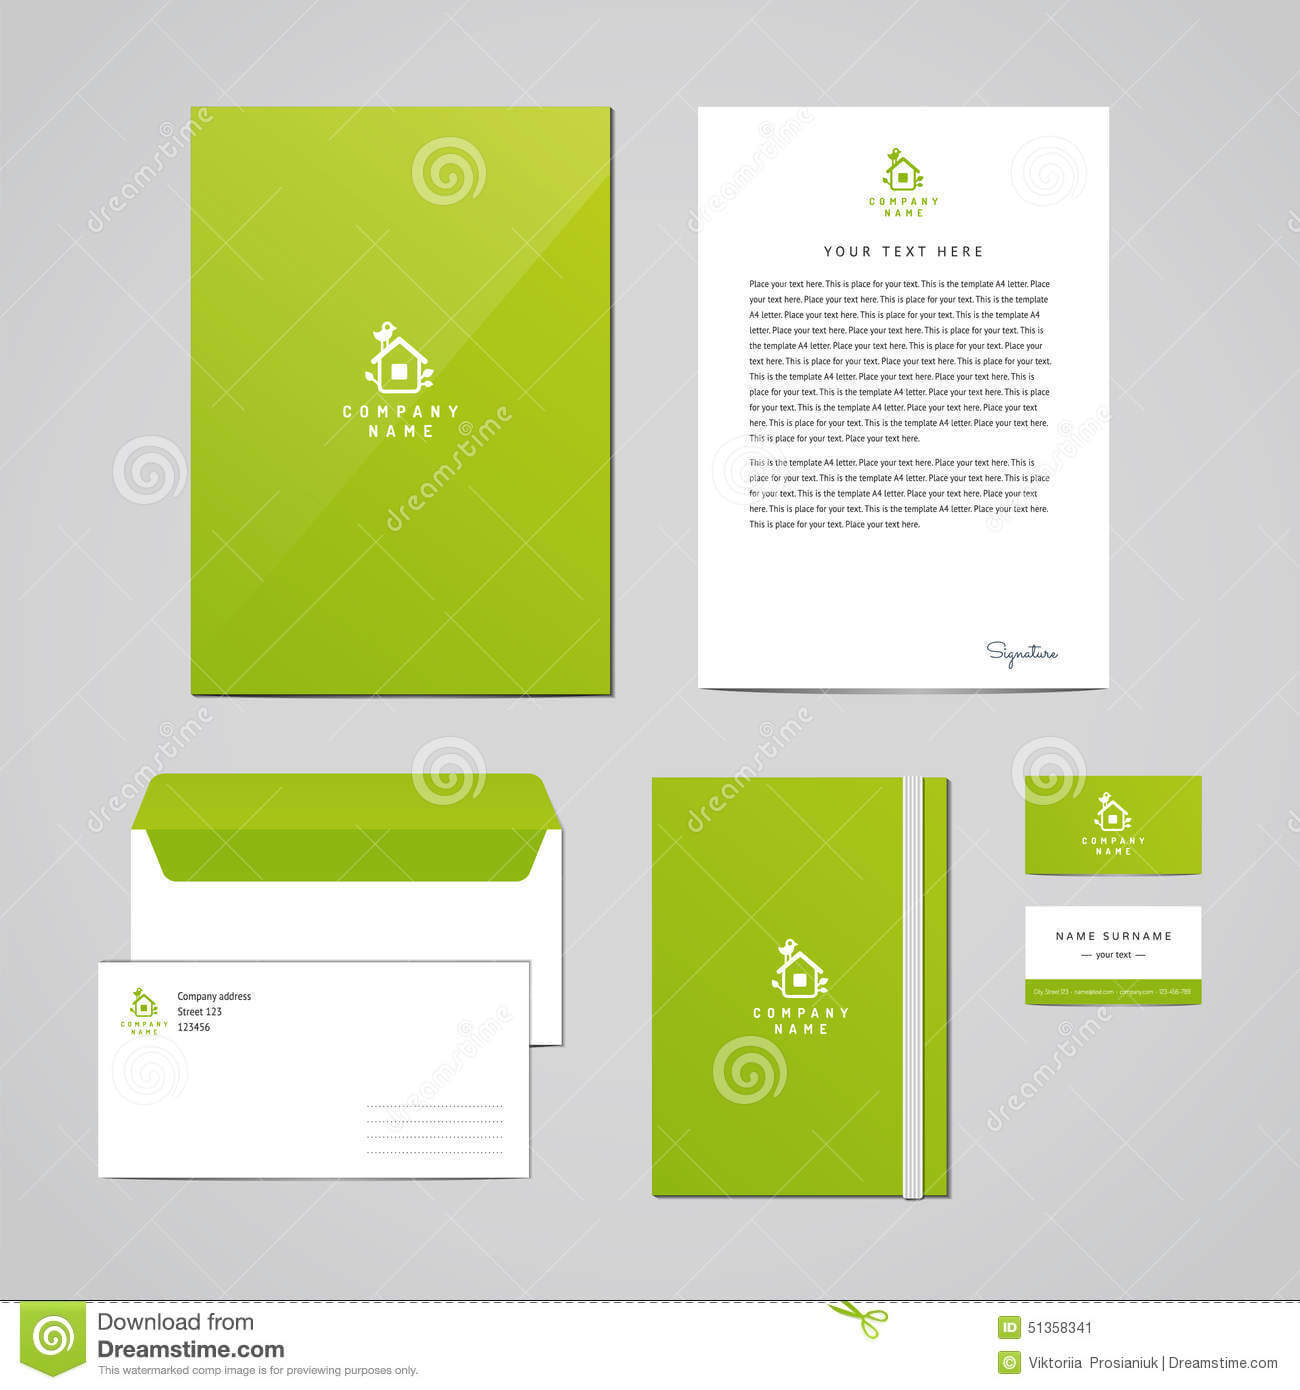 Corporate Identity Eco Design Template. Documentation For For Business Card Letterhead Envelope Template